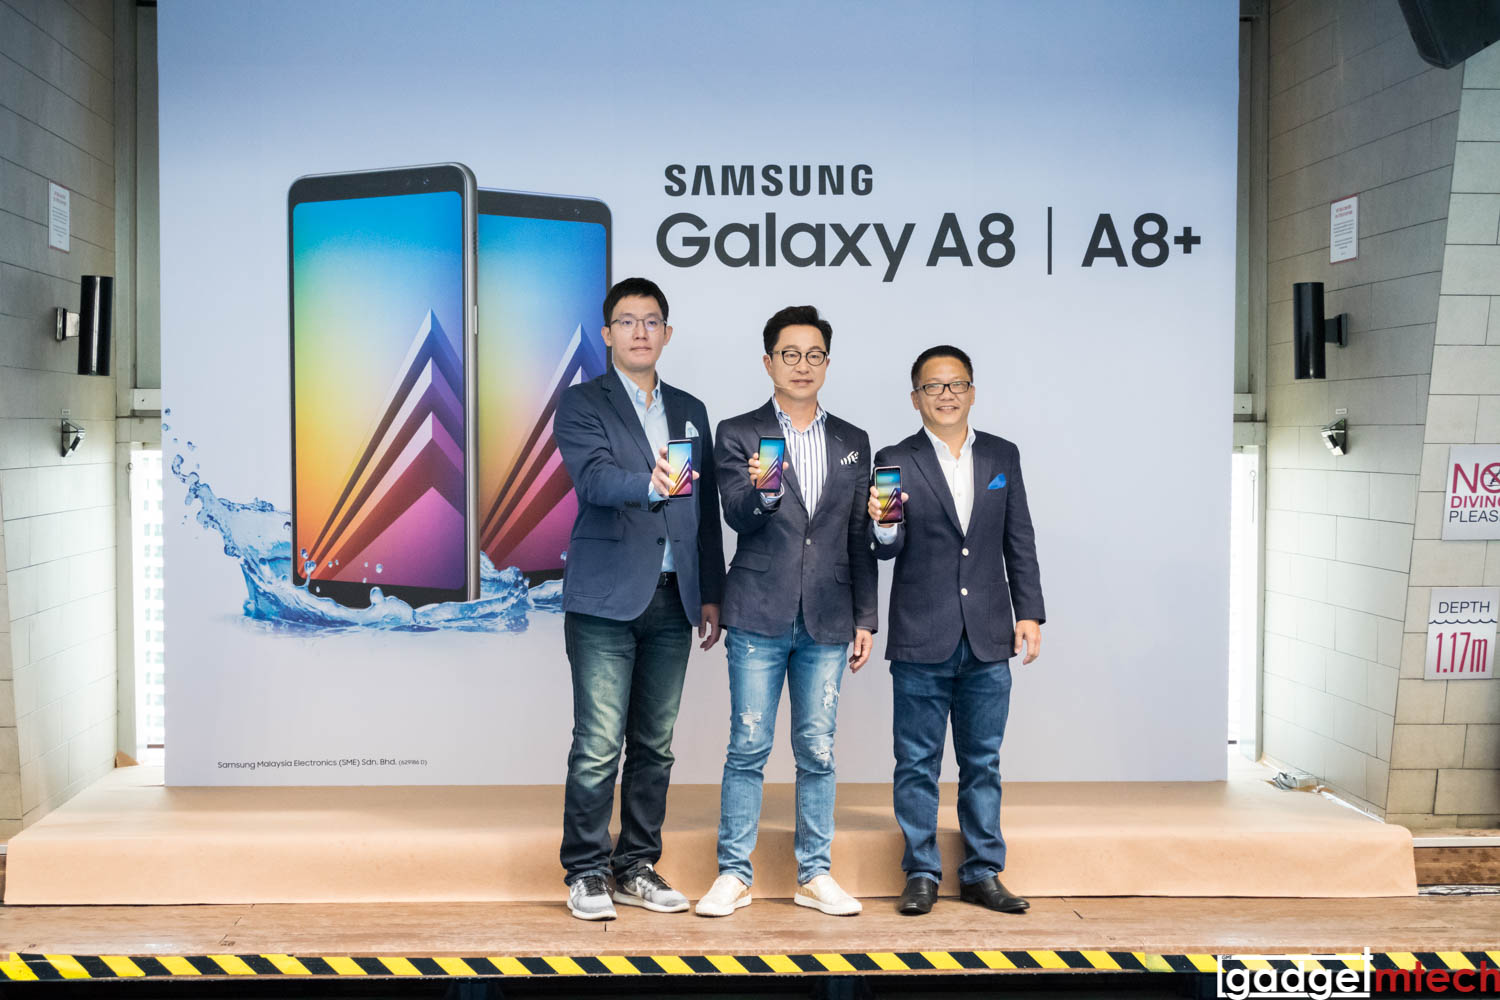 Samsung Galaxy A8 (2018) and A8+ (2018) Officially Launched in Malaysia